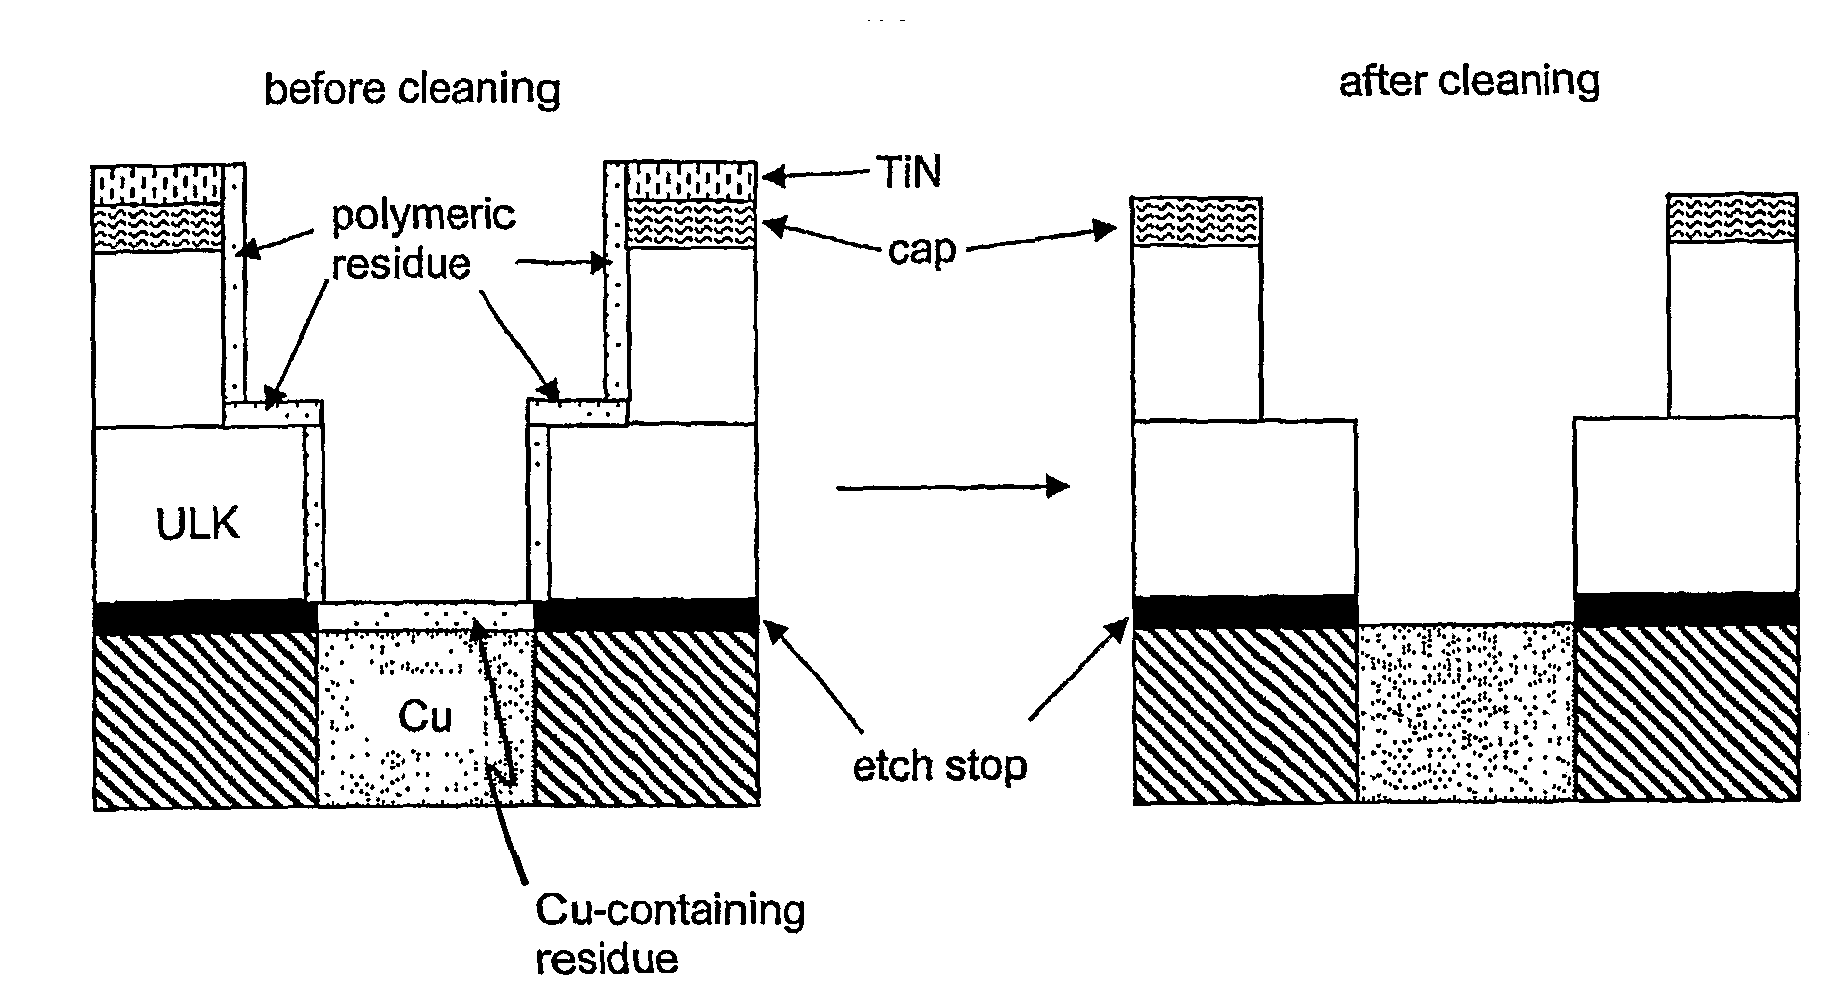 Oxidizing aqueous cleaner for the removal of post-etch residues